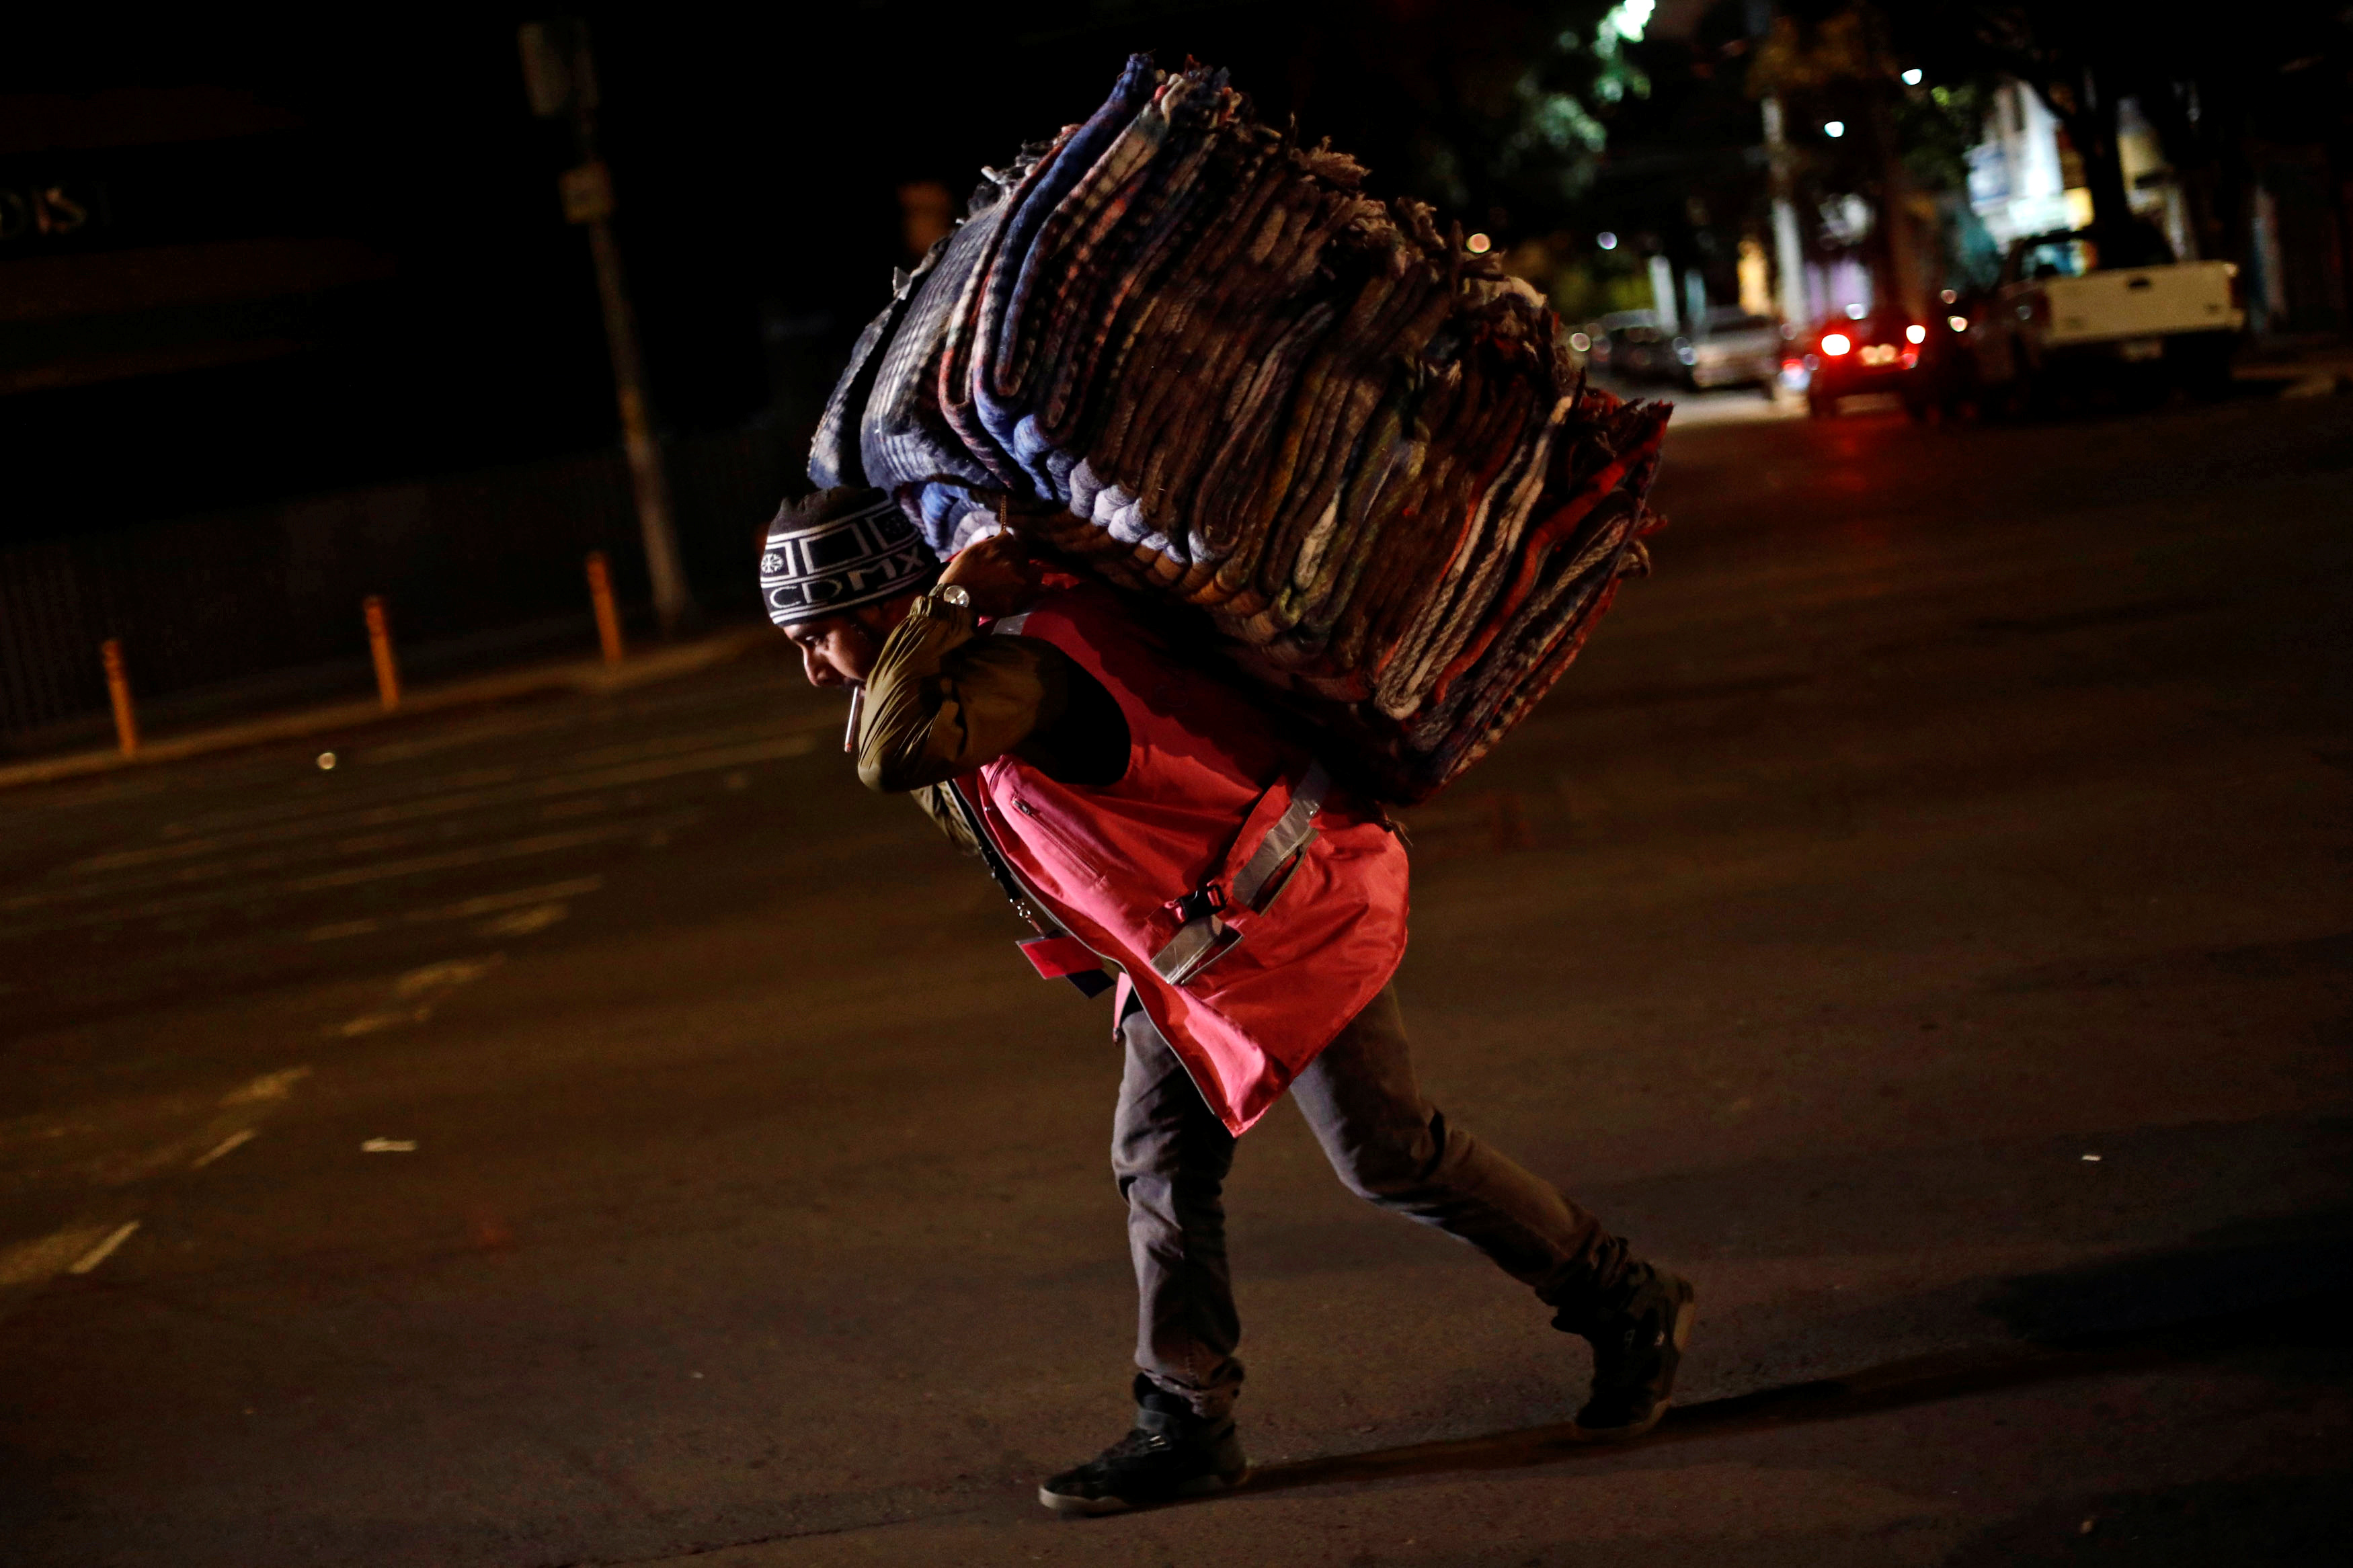 A volunteer carries blankets after an earthquake hit Mexico City, Mexico on Sept. 8, 2017. (REUTERS/Edgard Garrido)